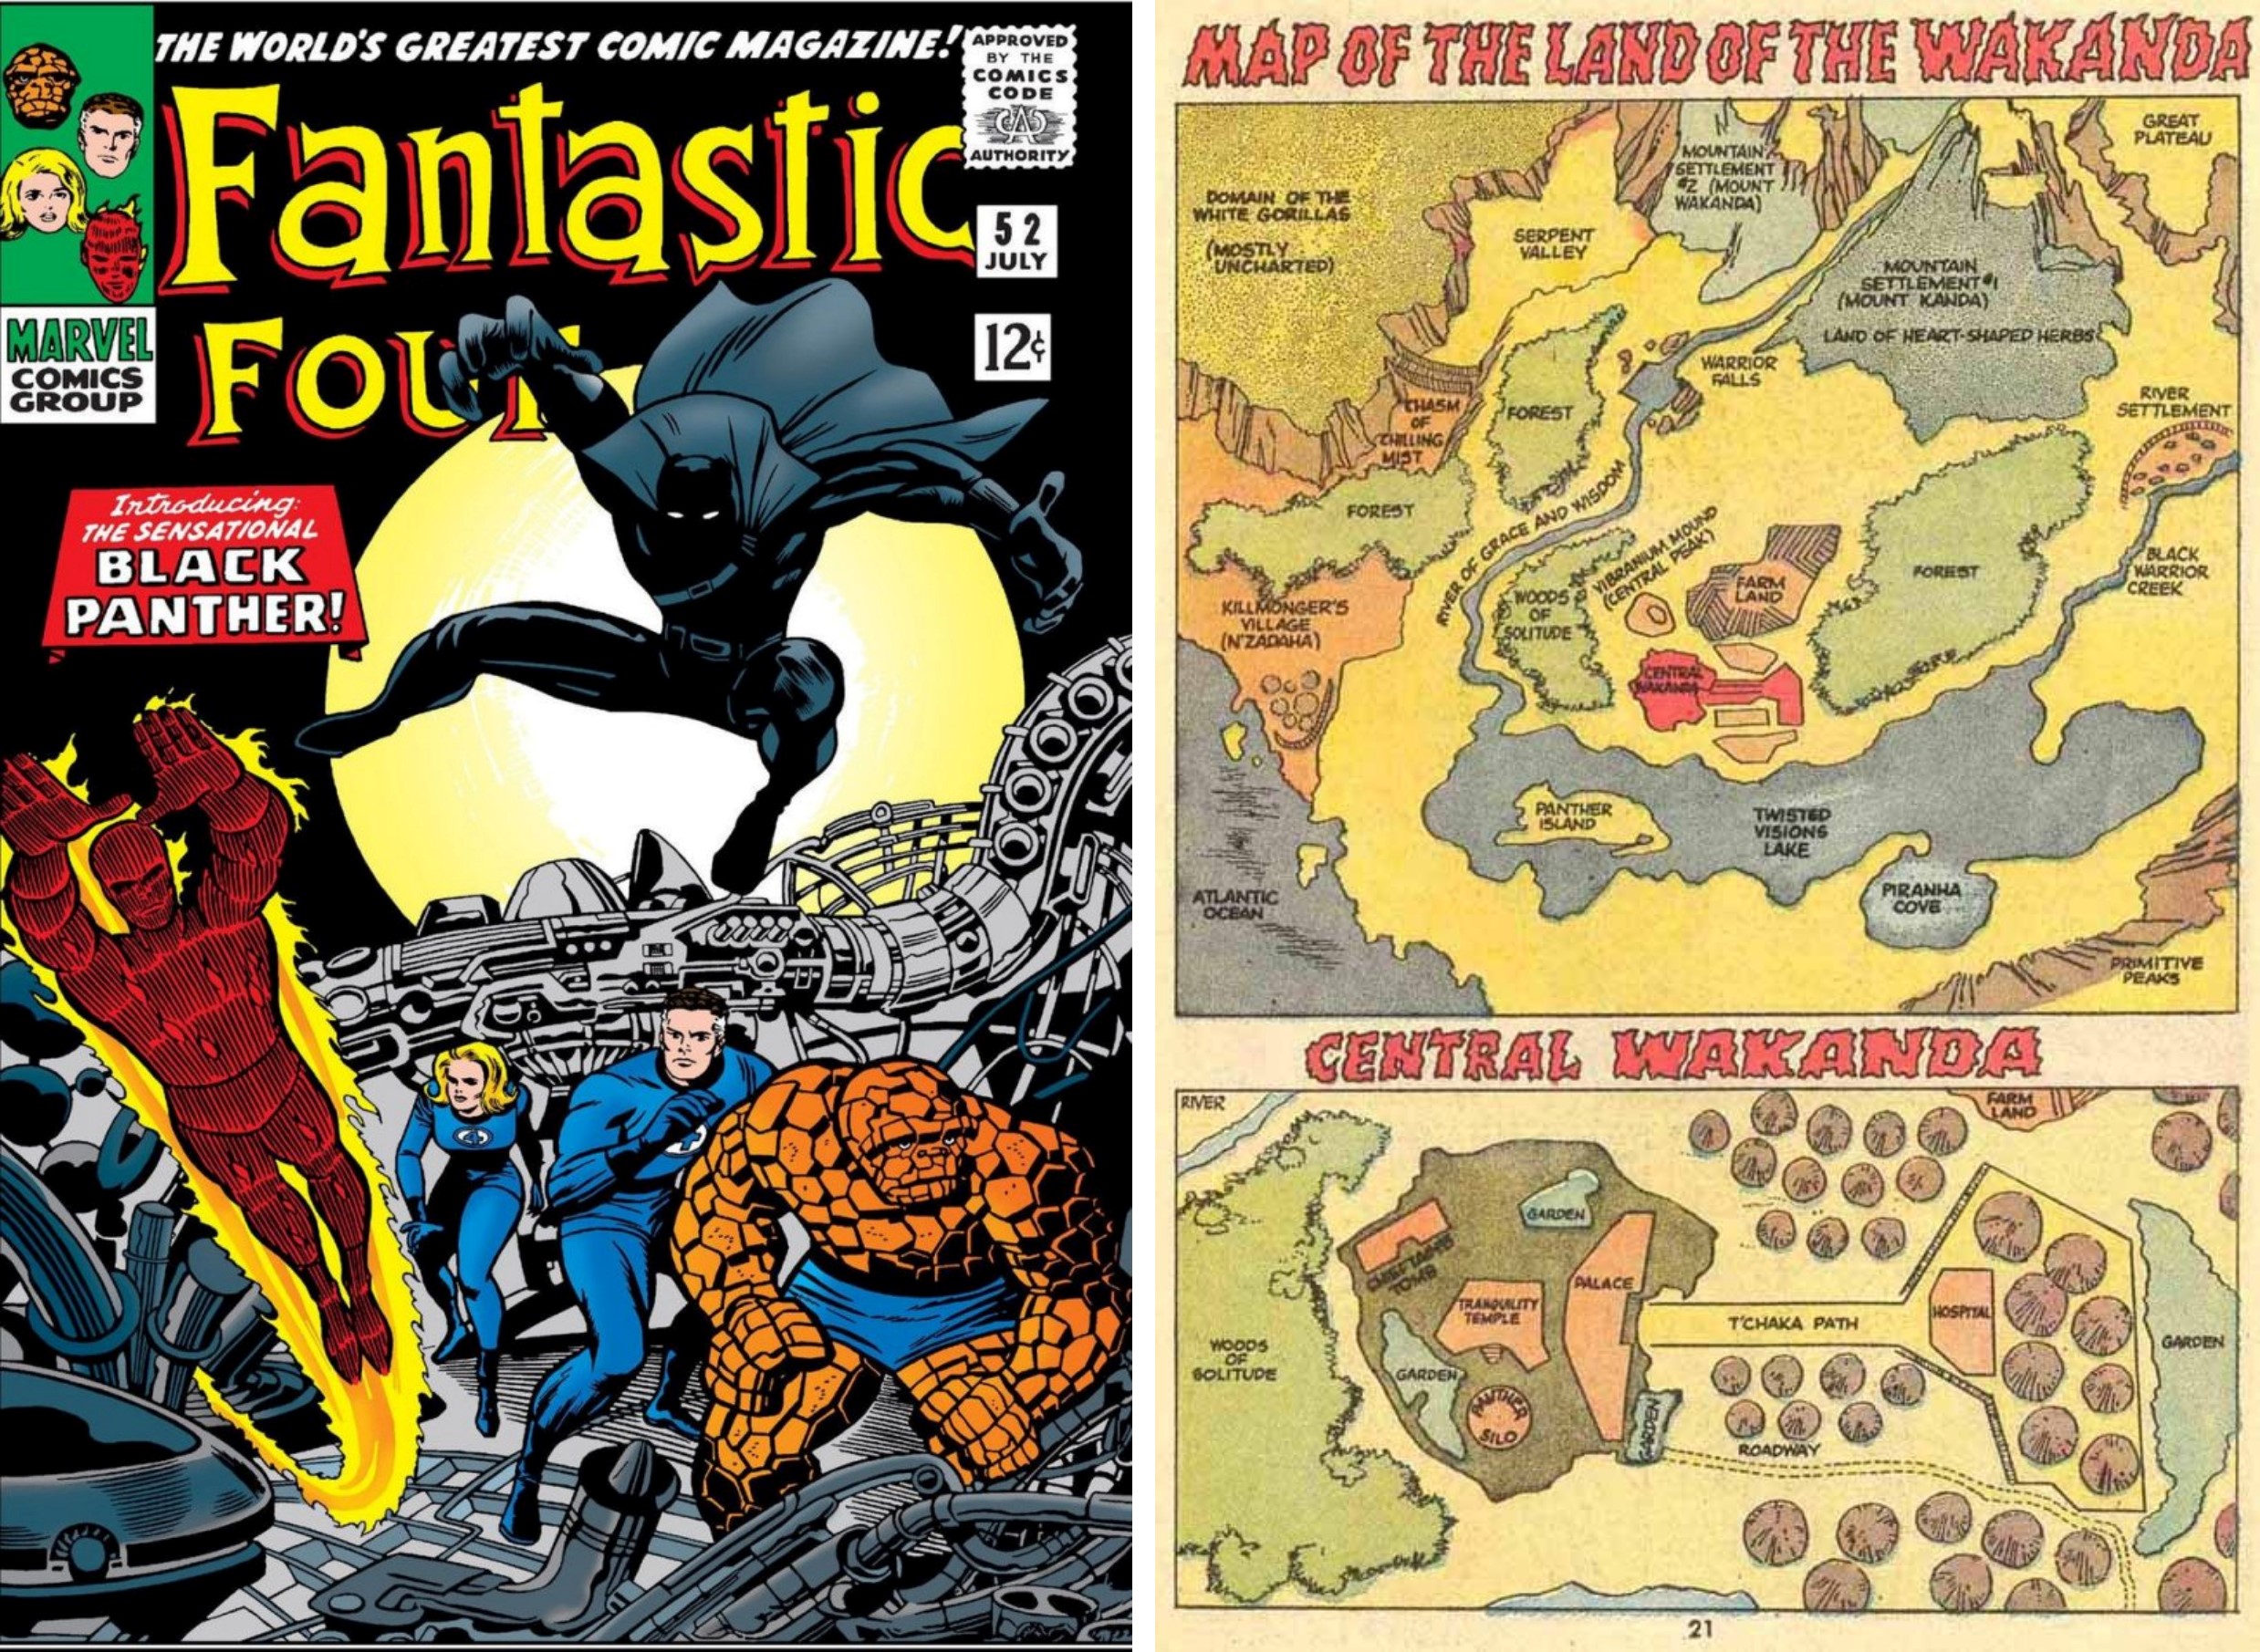 On the left, the debut of Black Panther in Fantastic Four #52. On the right, a map of the fictional land of Wakanda from Jungle Action #6.